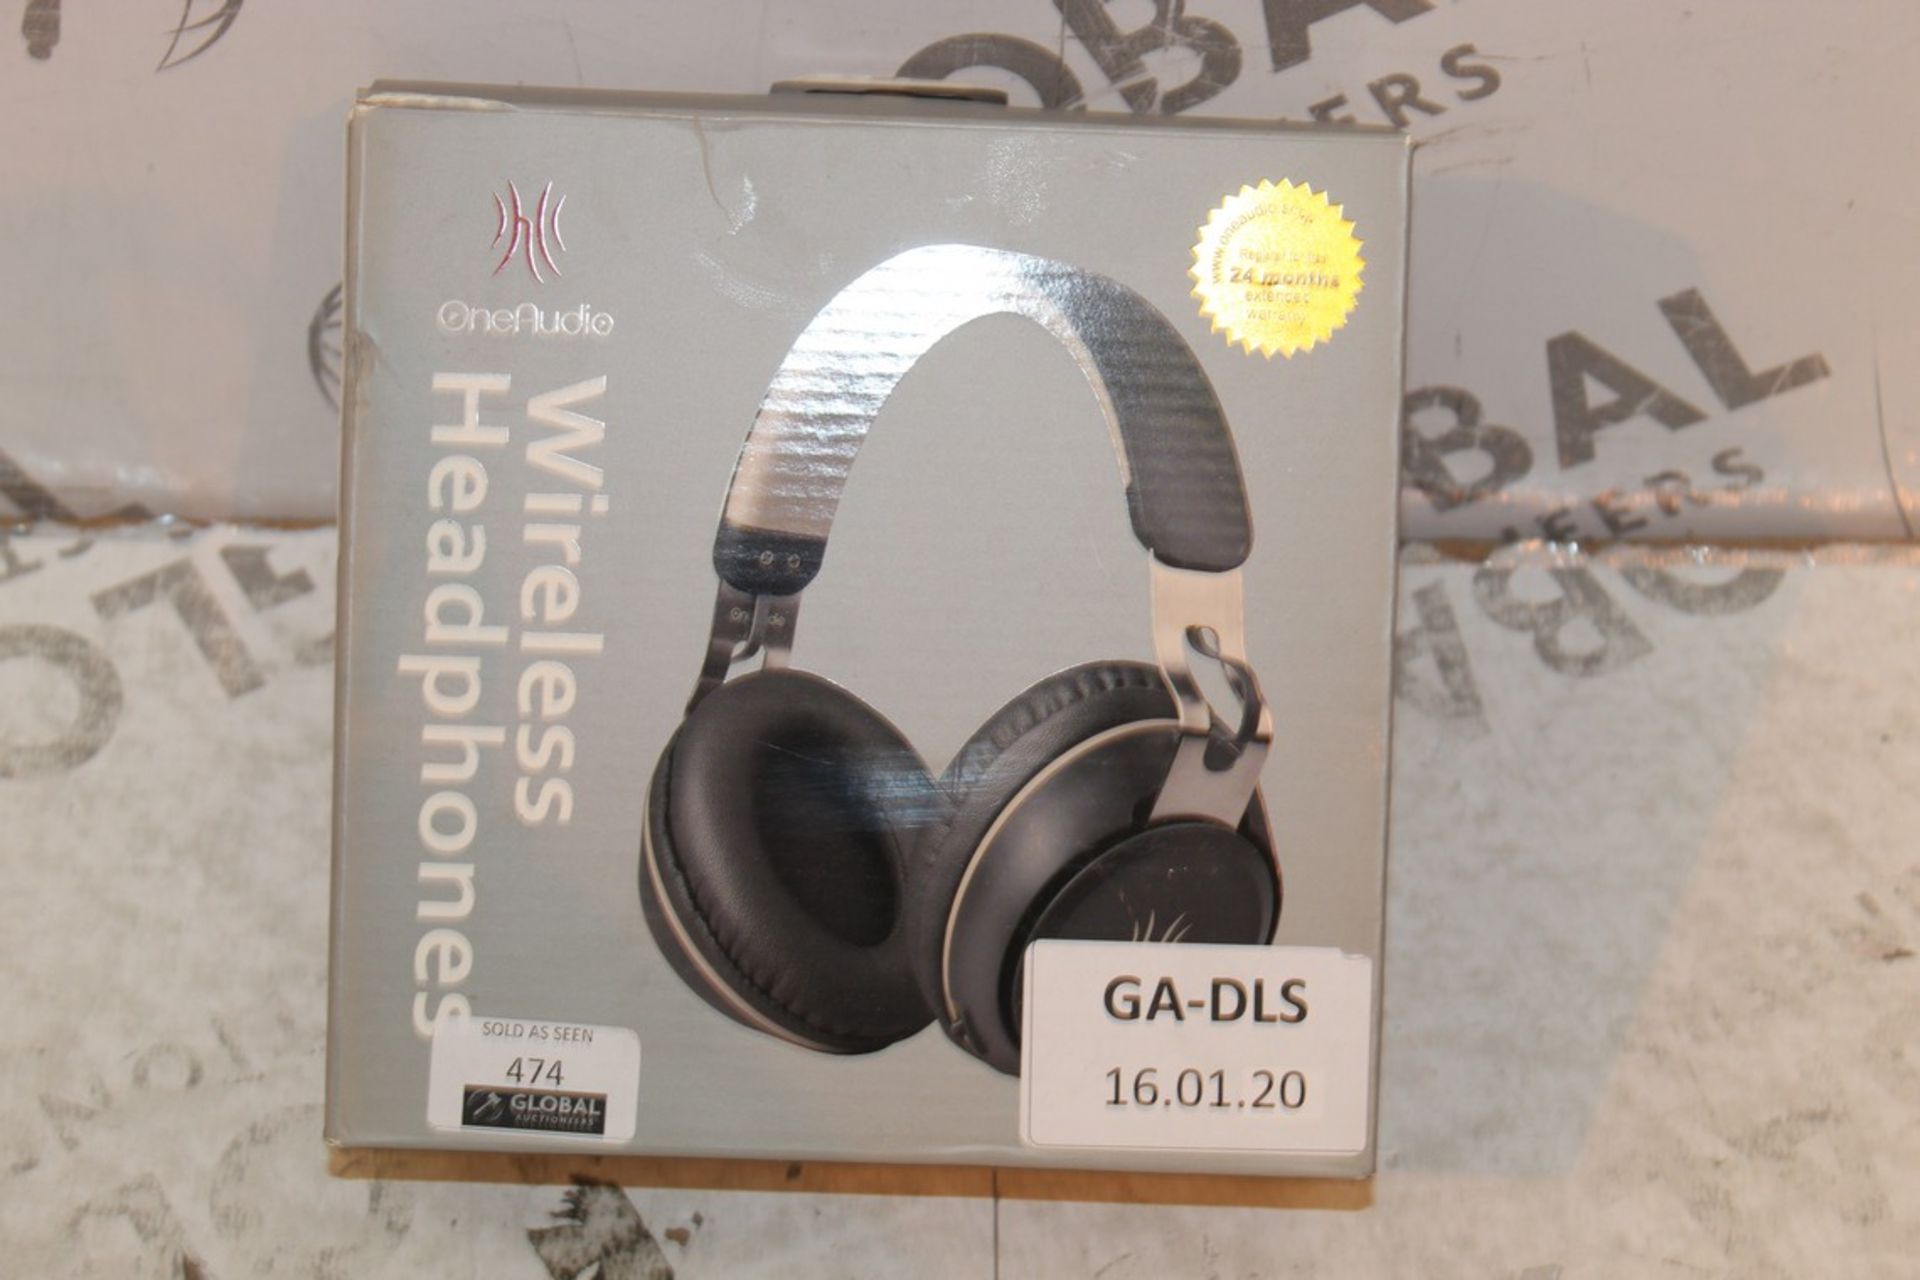 Lot to Contain 2 Boxed Pairs One Audio Wireless A1 Headphones Combined RRP £60 (Pictures Are For